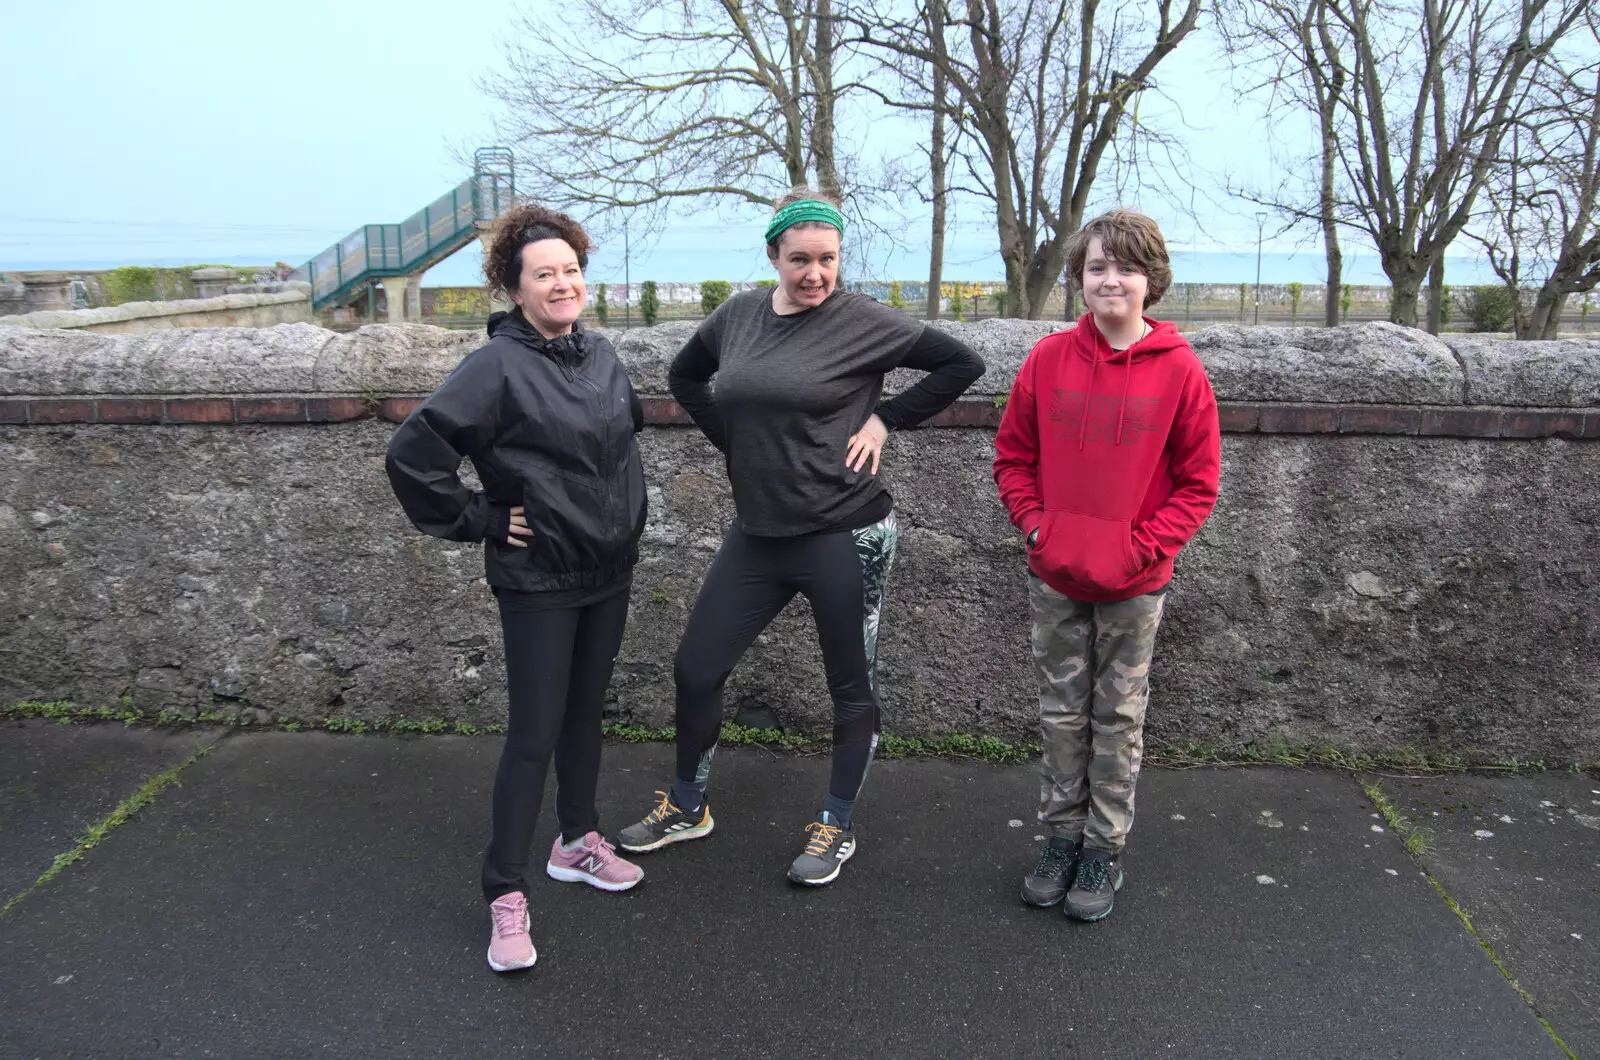 Evelyn, Isobel and Fred before their run, from The End of the Breffni, Blackrock, Dublin - 18th February 2023